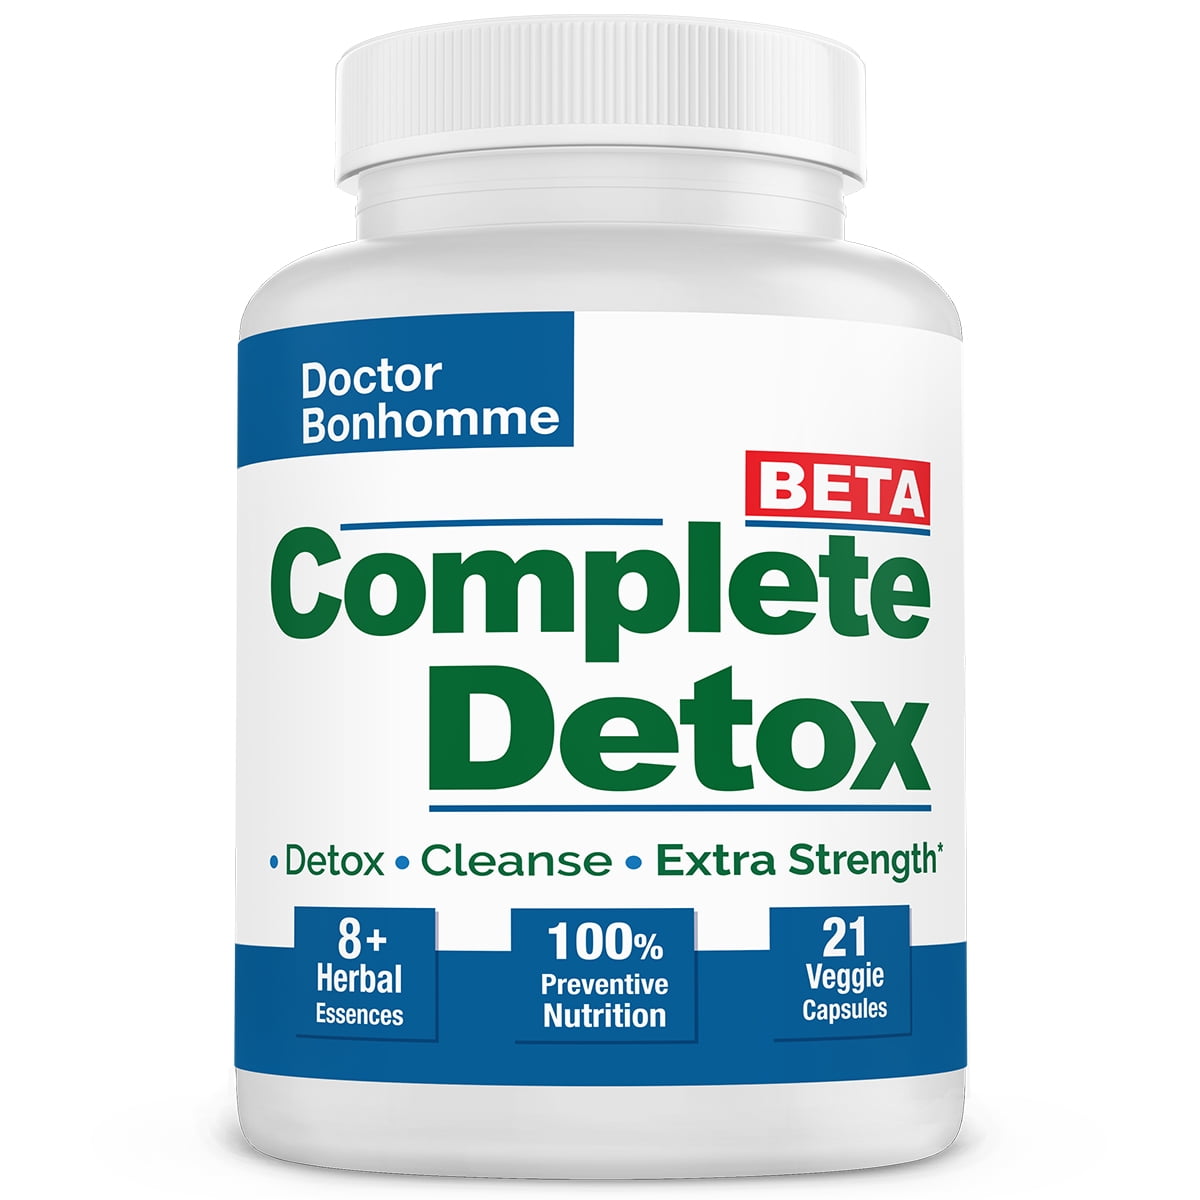 Complete Detox [BETA Formula ]7 day 21 Caps ? Accelerated whole body detox  with laxative for most thorough cleanse